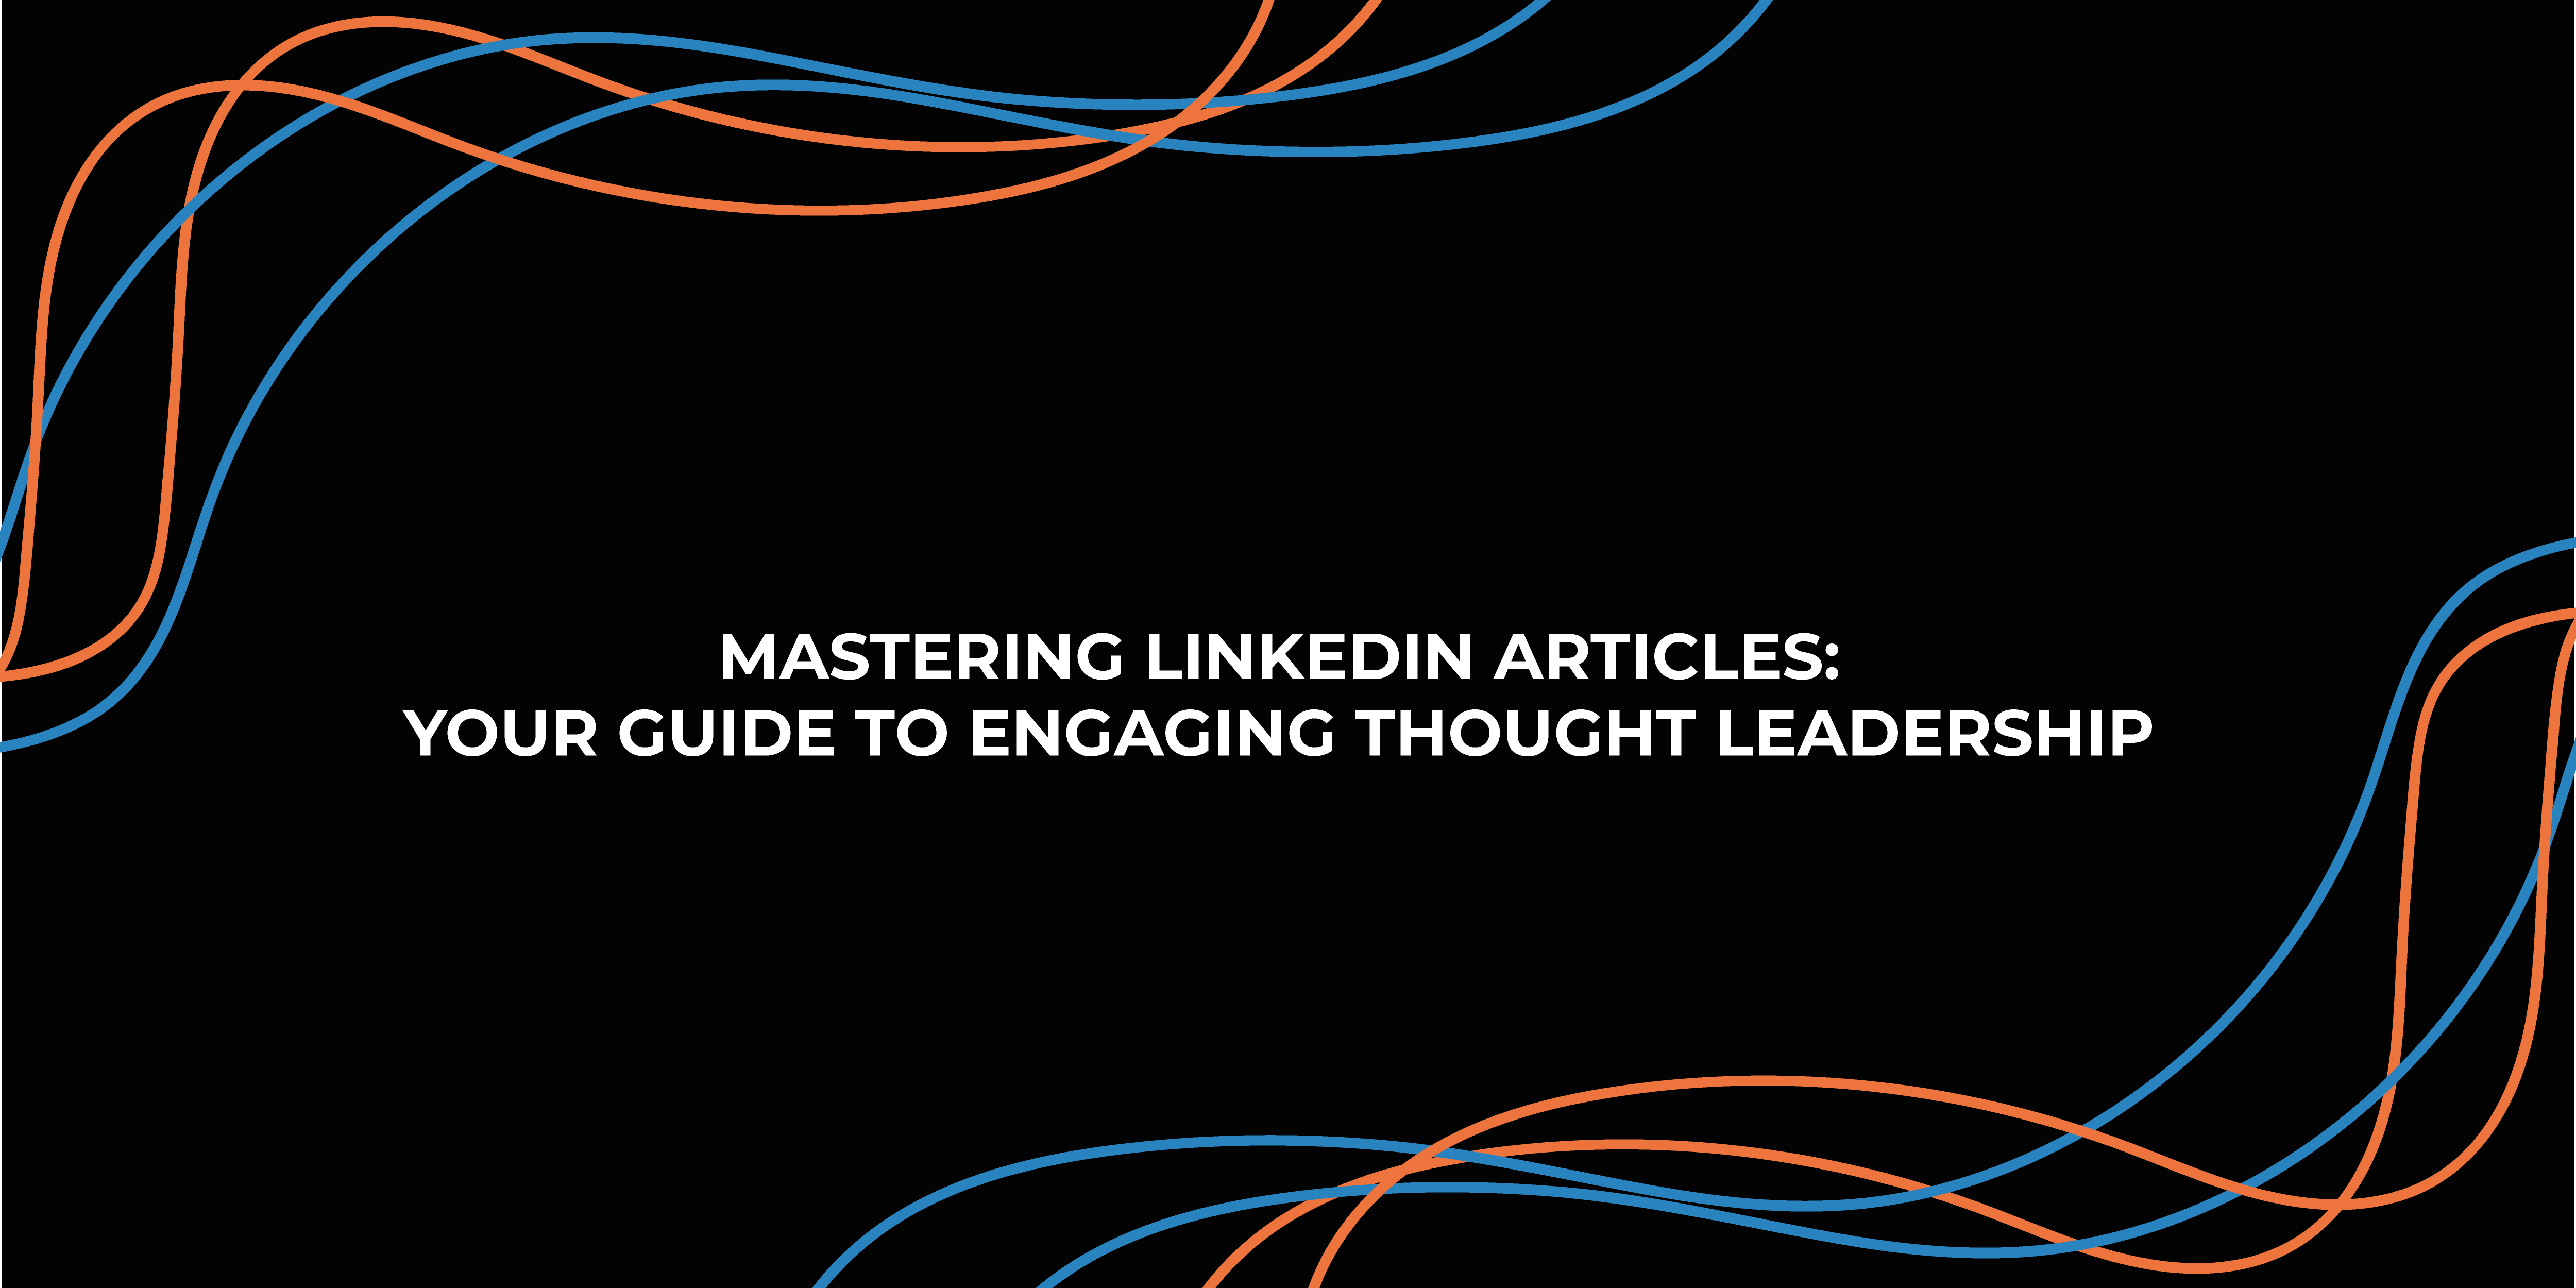 Mastering LinkedIn Articles: Your Guide to Engaging Thought Leadership